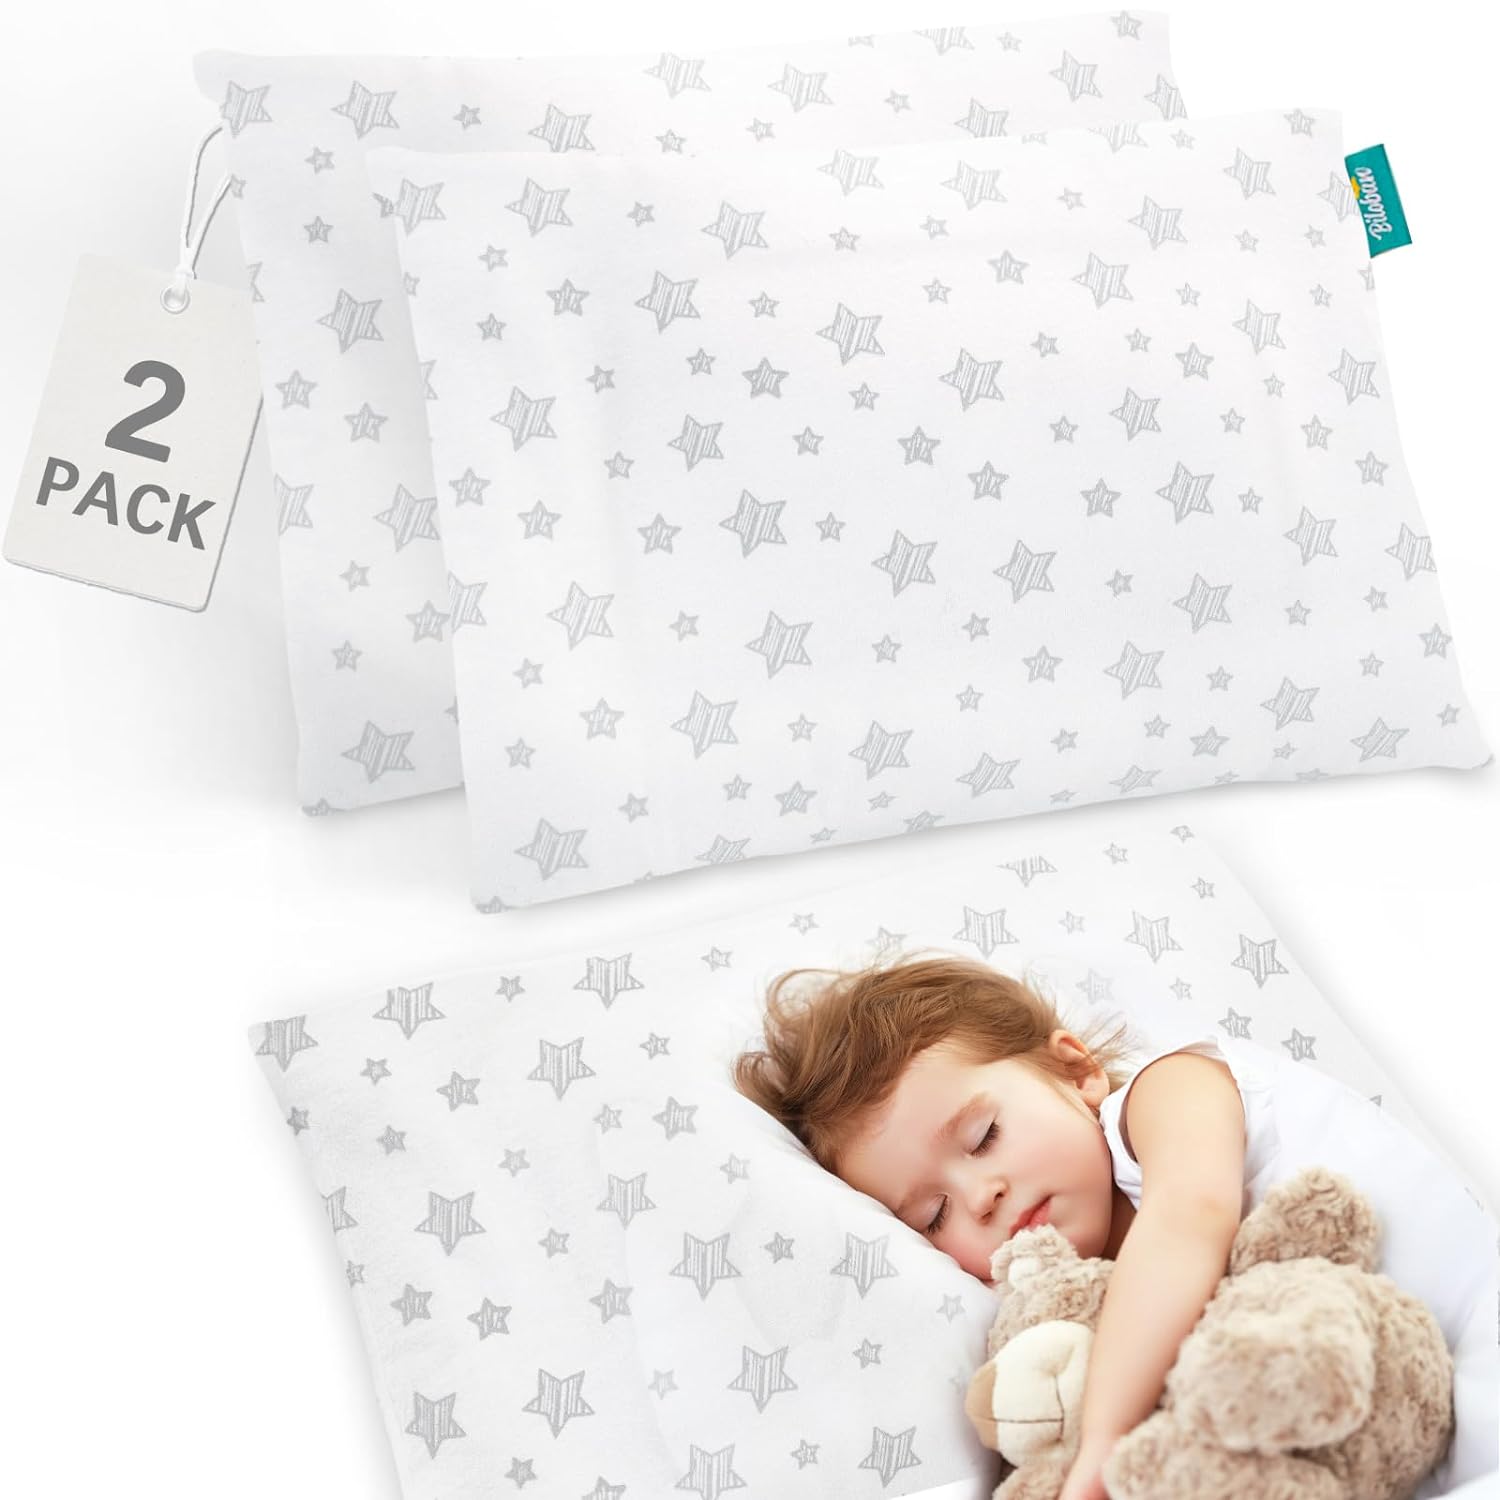 Toddler Pillow Quilted with Pillowcase - 2 Pack, 13" x 18", 100% Cotton, Ultra Soft & Breathable, White Stars - Biloban Online Store